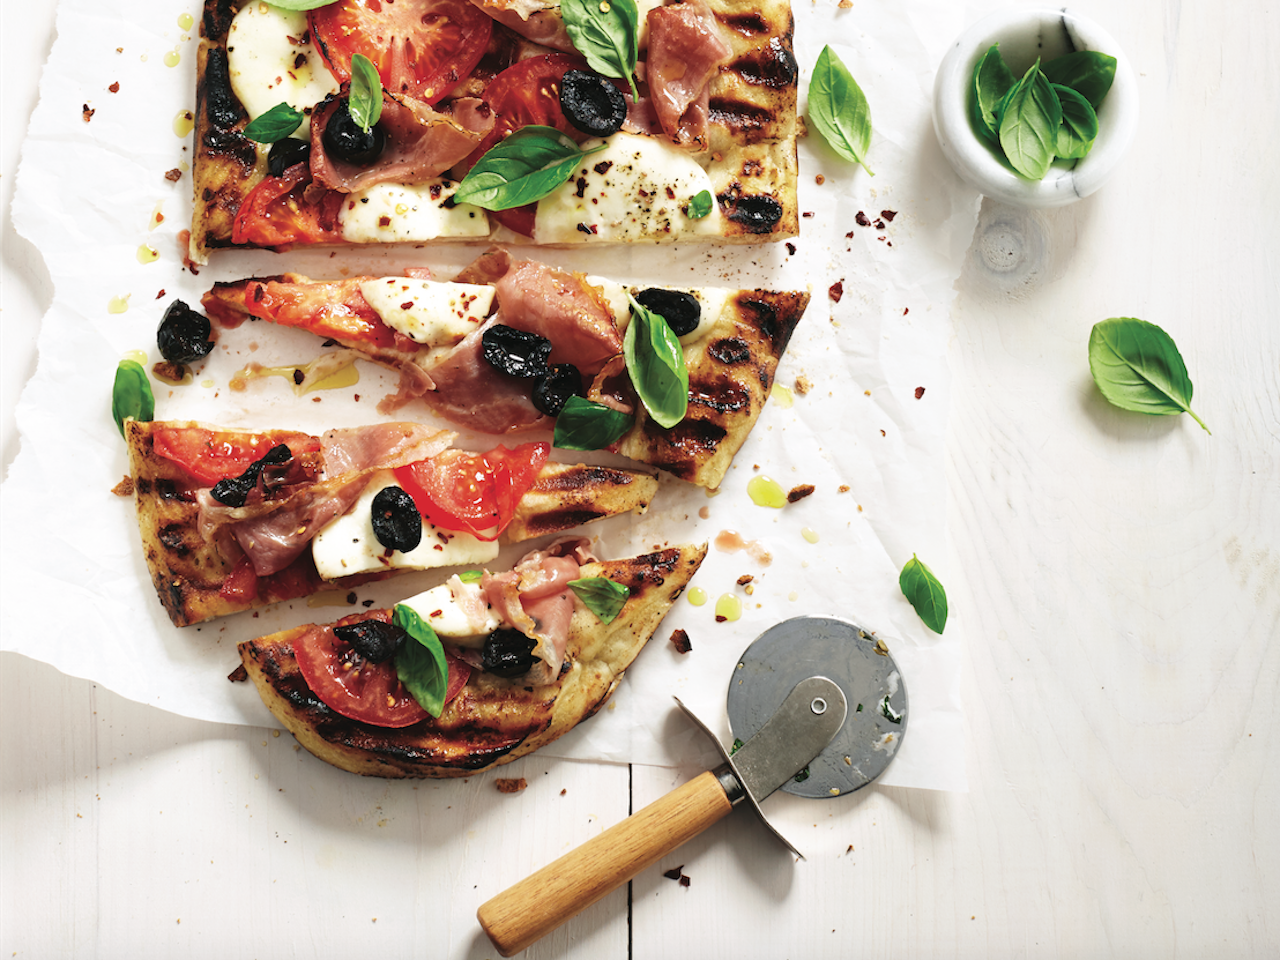 Grilled pizza recipe: Partly sliced grilled pizza on a wooden cutting board, topped with cheese, basil and prosciutto.